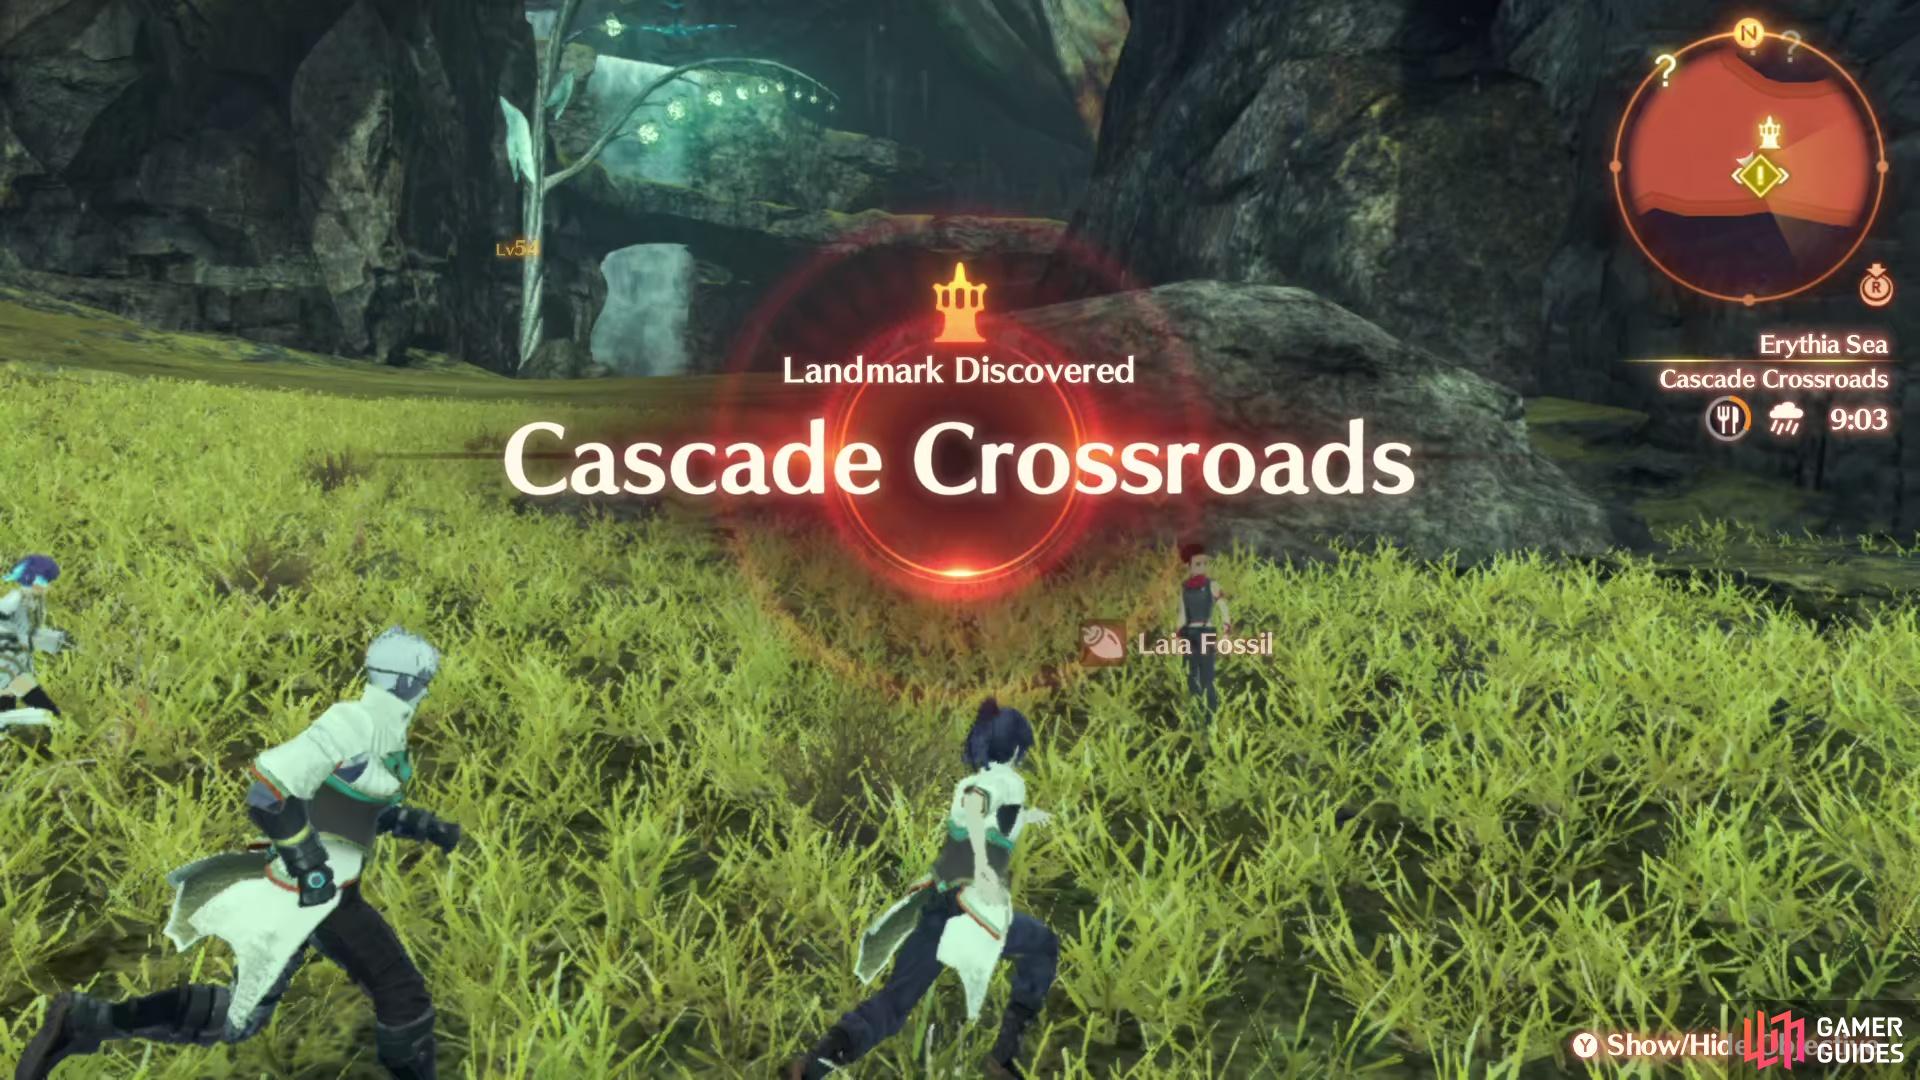 The final challenge takes place at the Cascade Crossroads